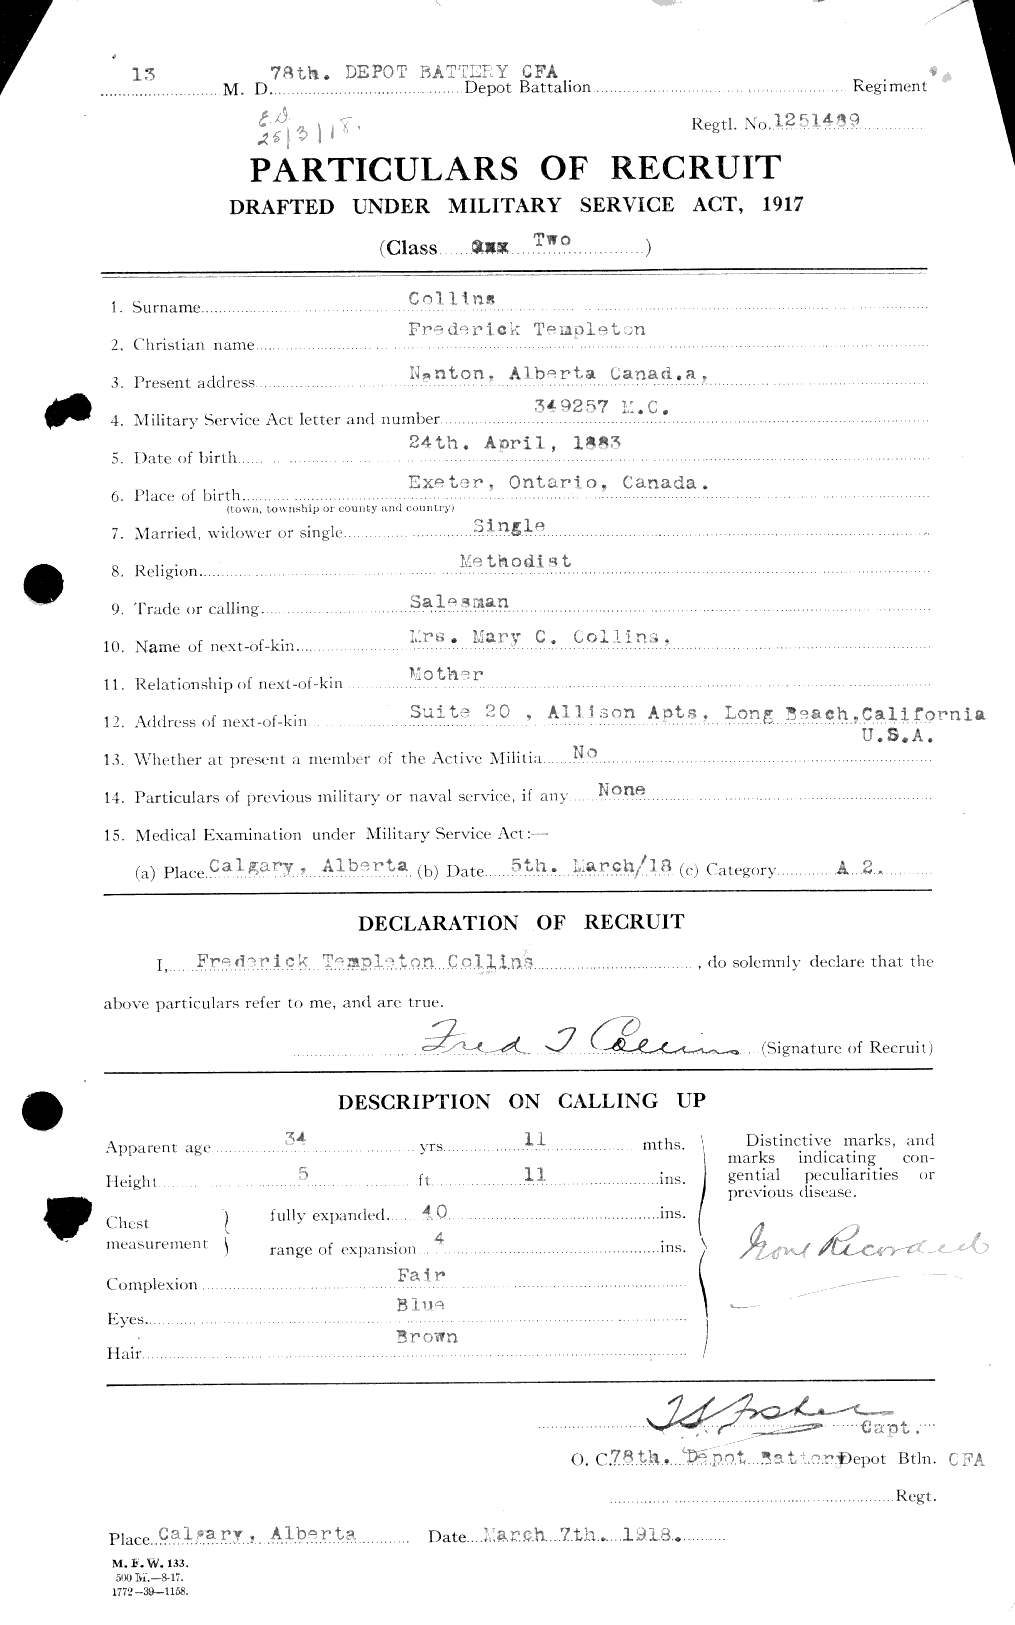 Personnel Records of the First World War - CEF 037840a